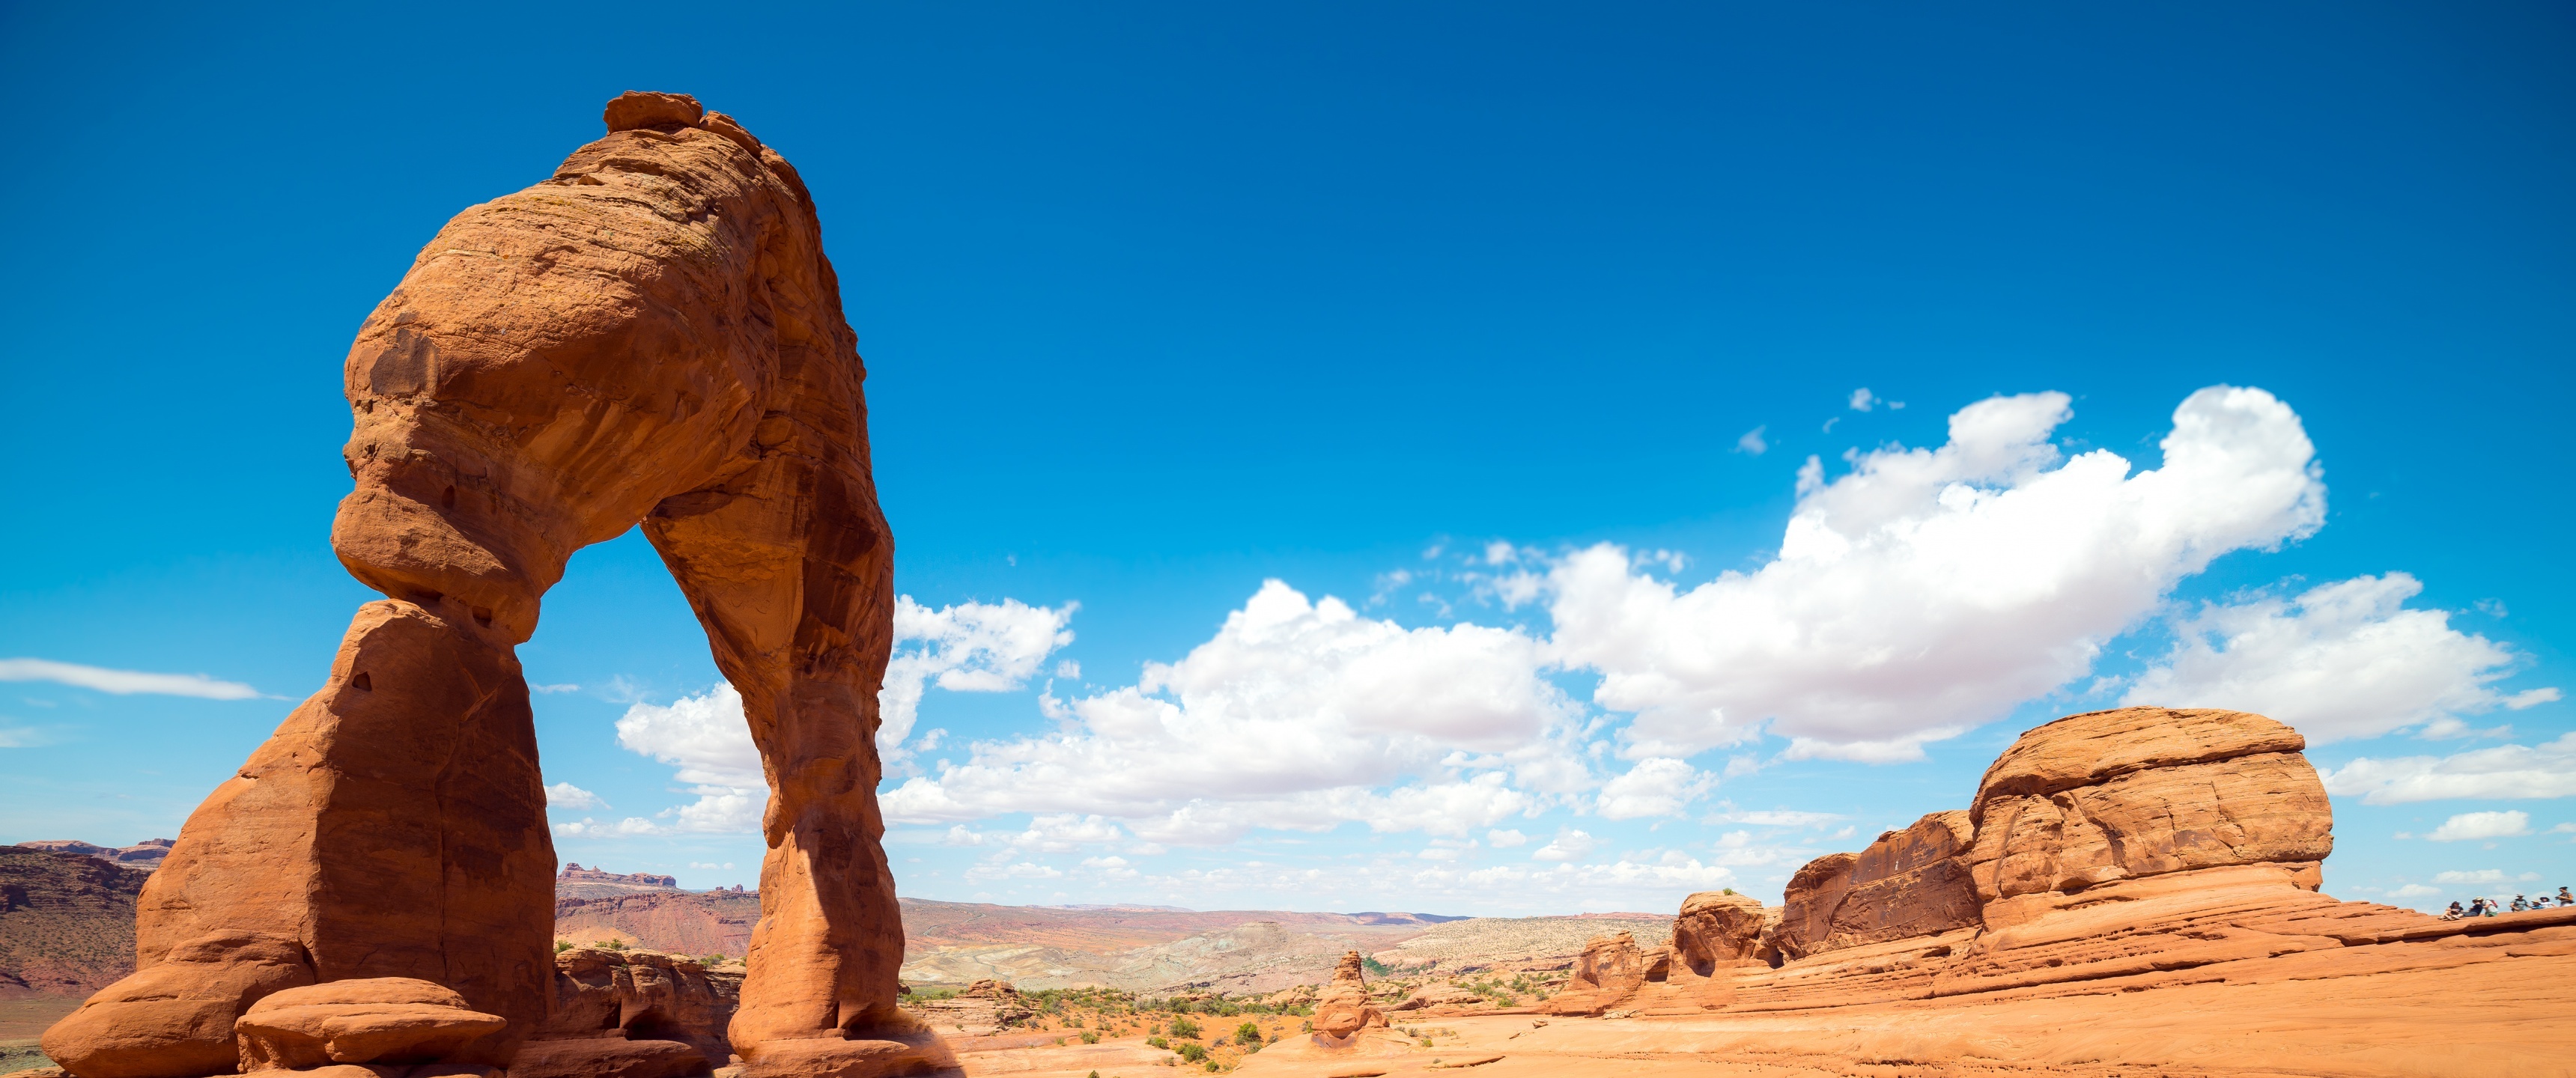 Utah: Delicate Arch, Arches National Park, United States. 3440x1440 Dual Screen Background.